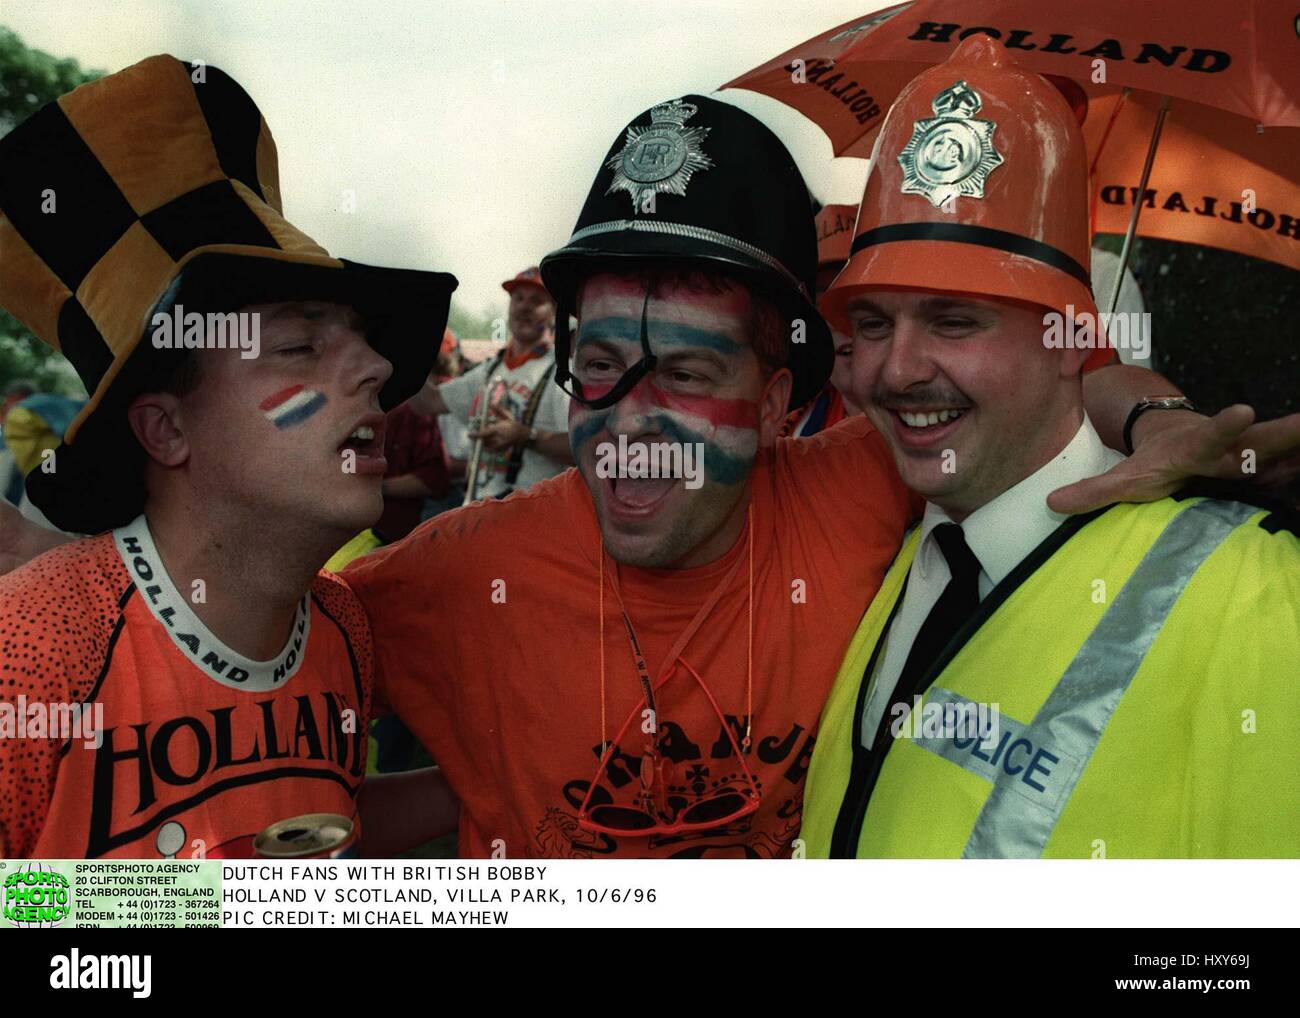 DUTCH FANS WITH POLICE OFFICER EURO 96 18 June 1996 Stock Photo